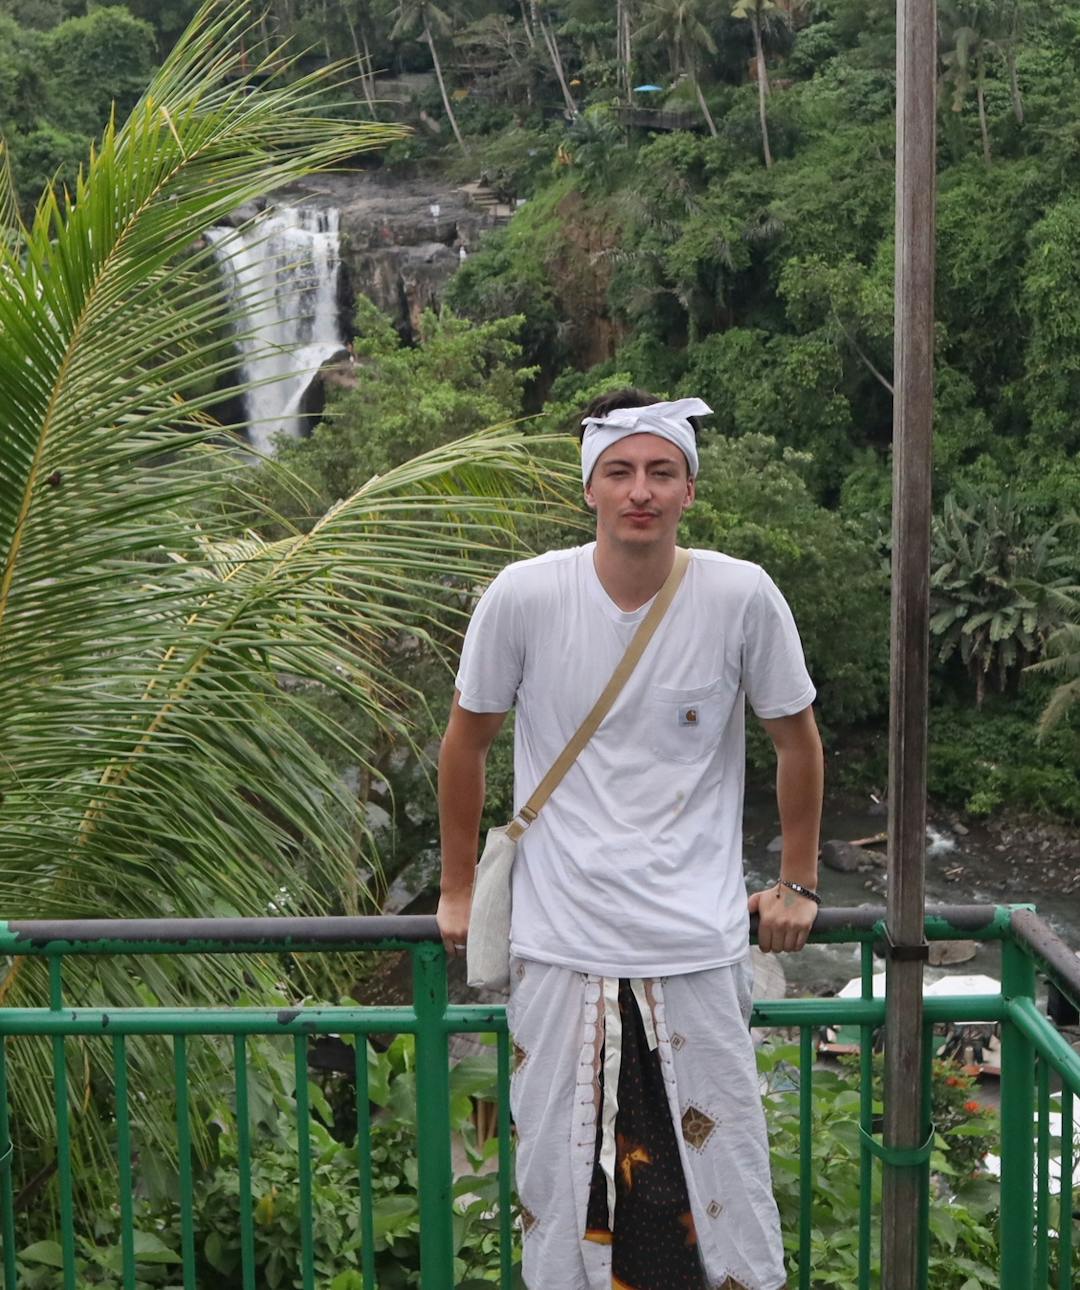 A photo from my Study Tour in Indonesia. This was taken at Tegenungan, in Bali